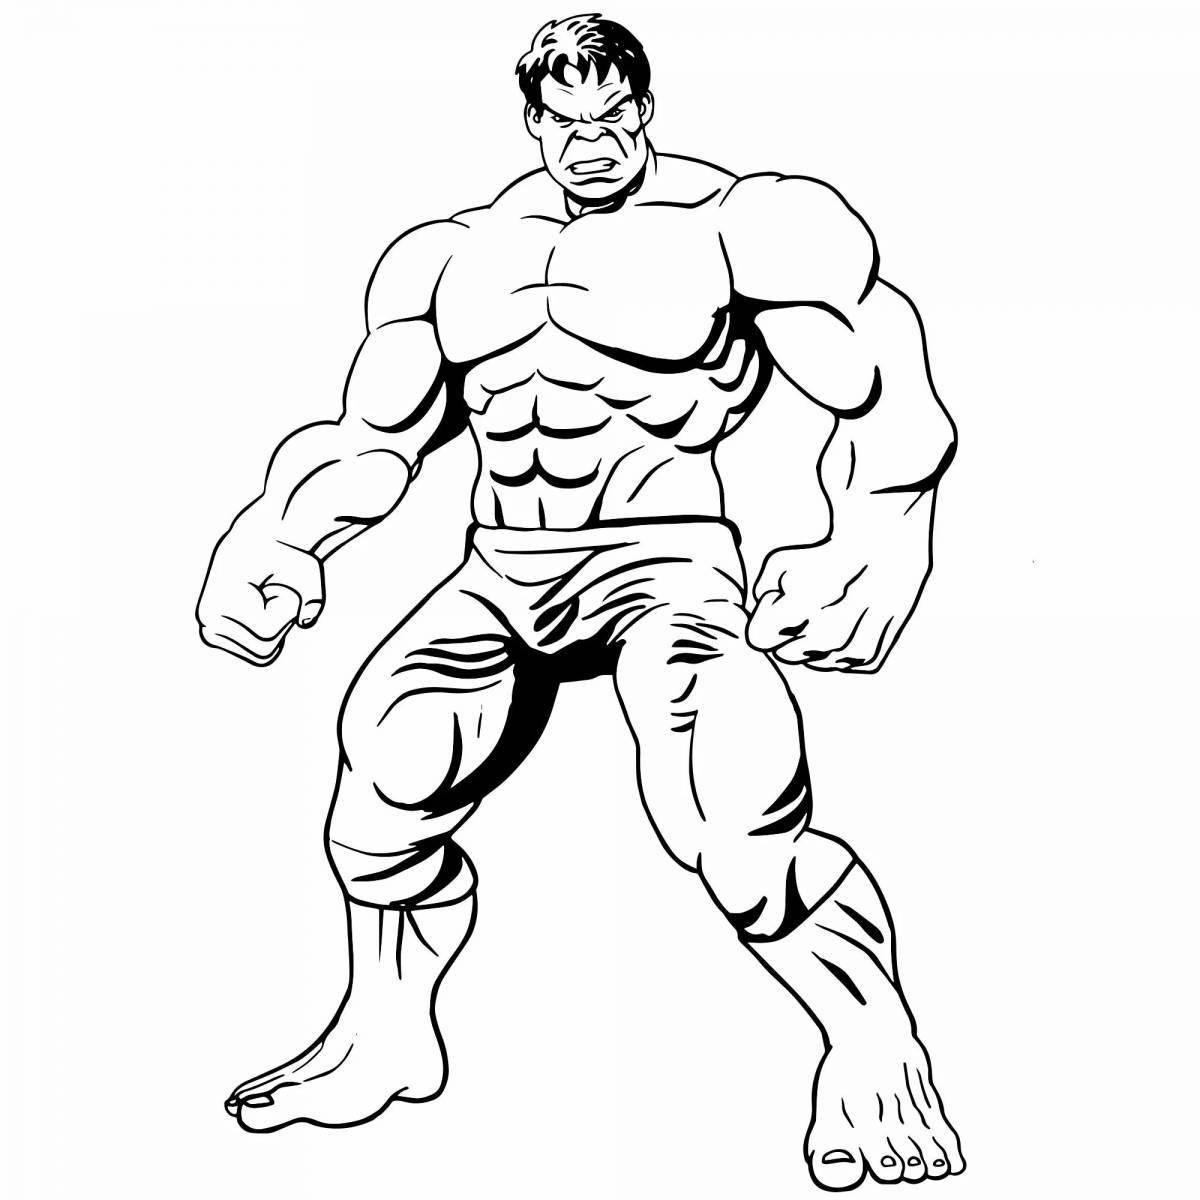 Fabulous Hulk coloring book for children 5-6 years old